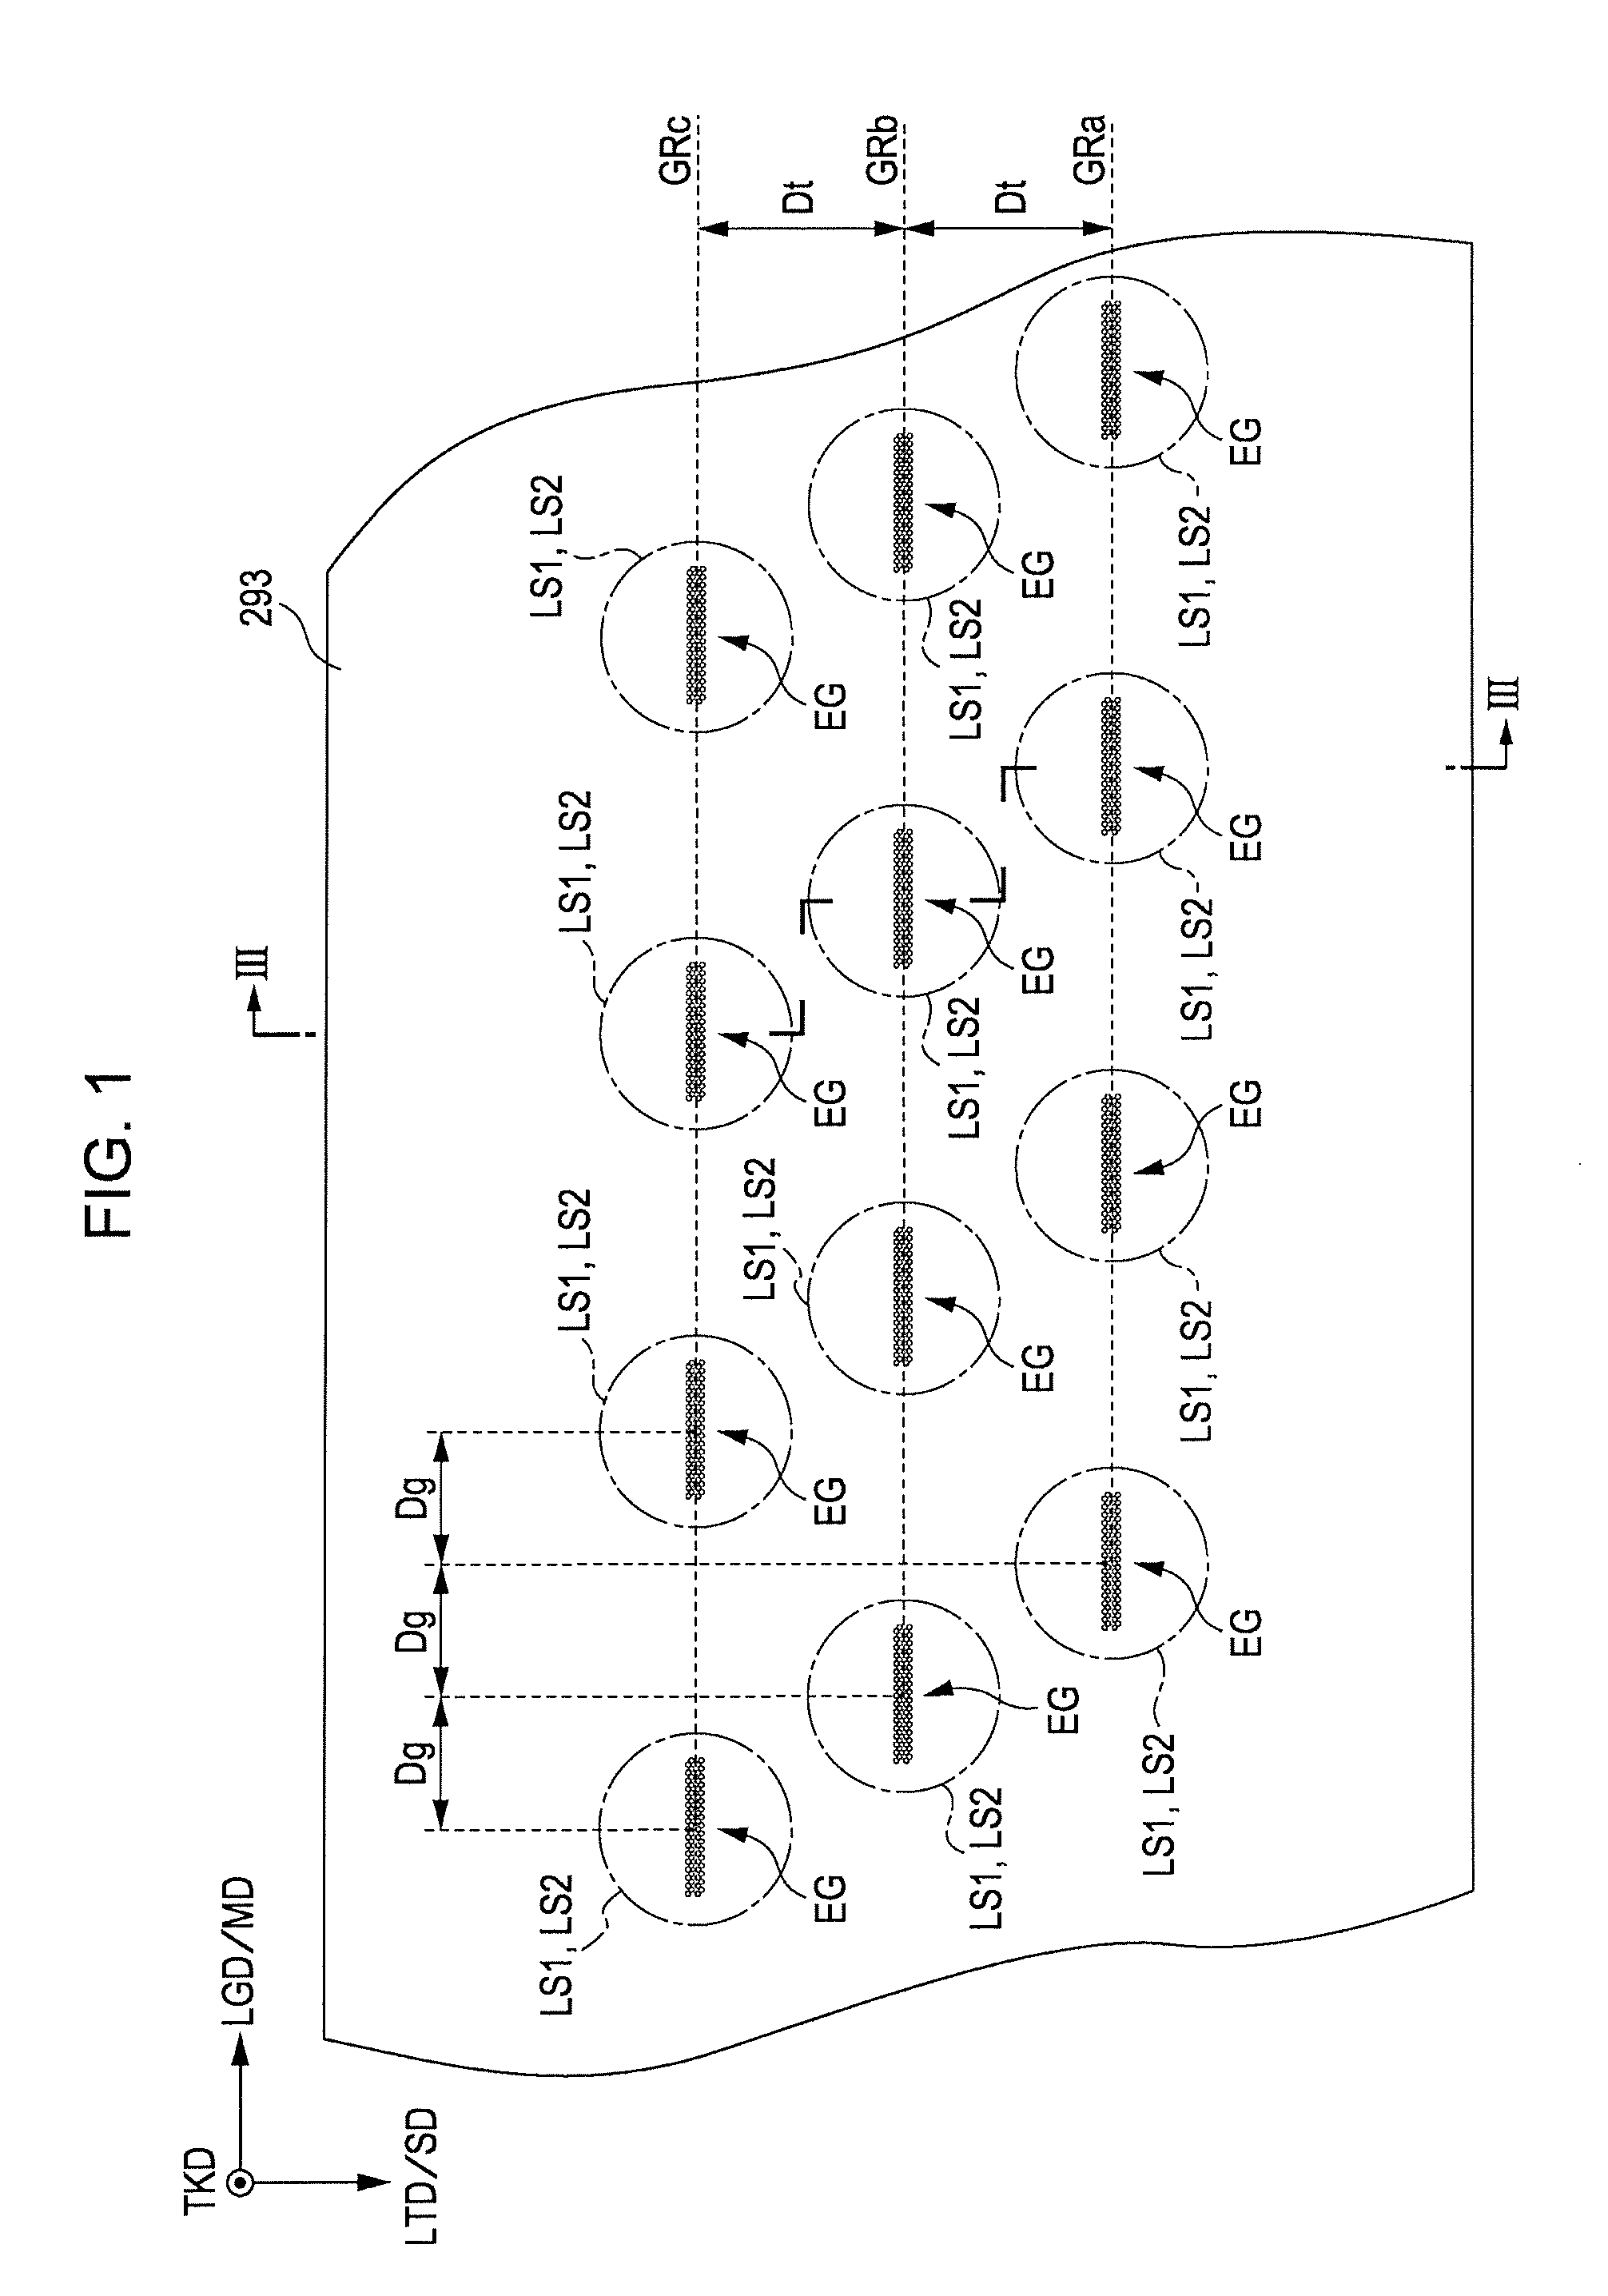 Exposure head and image forming apparatus